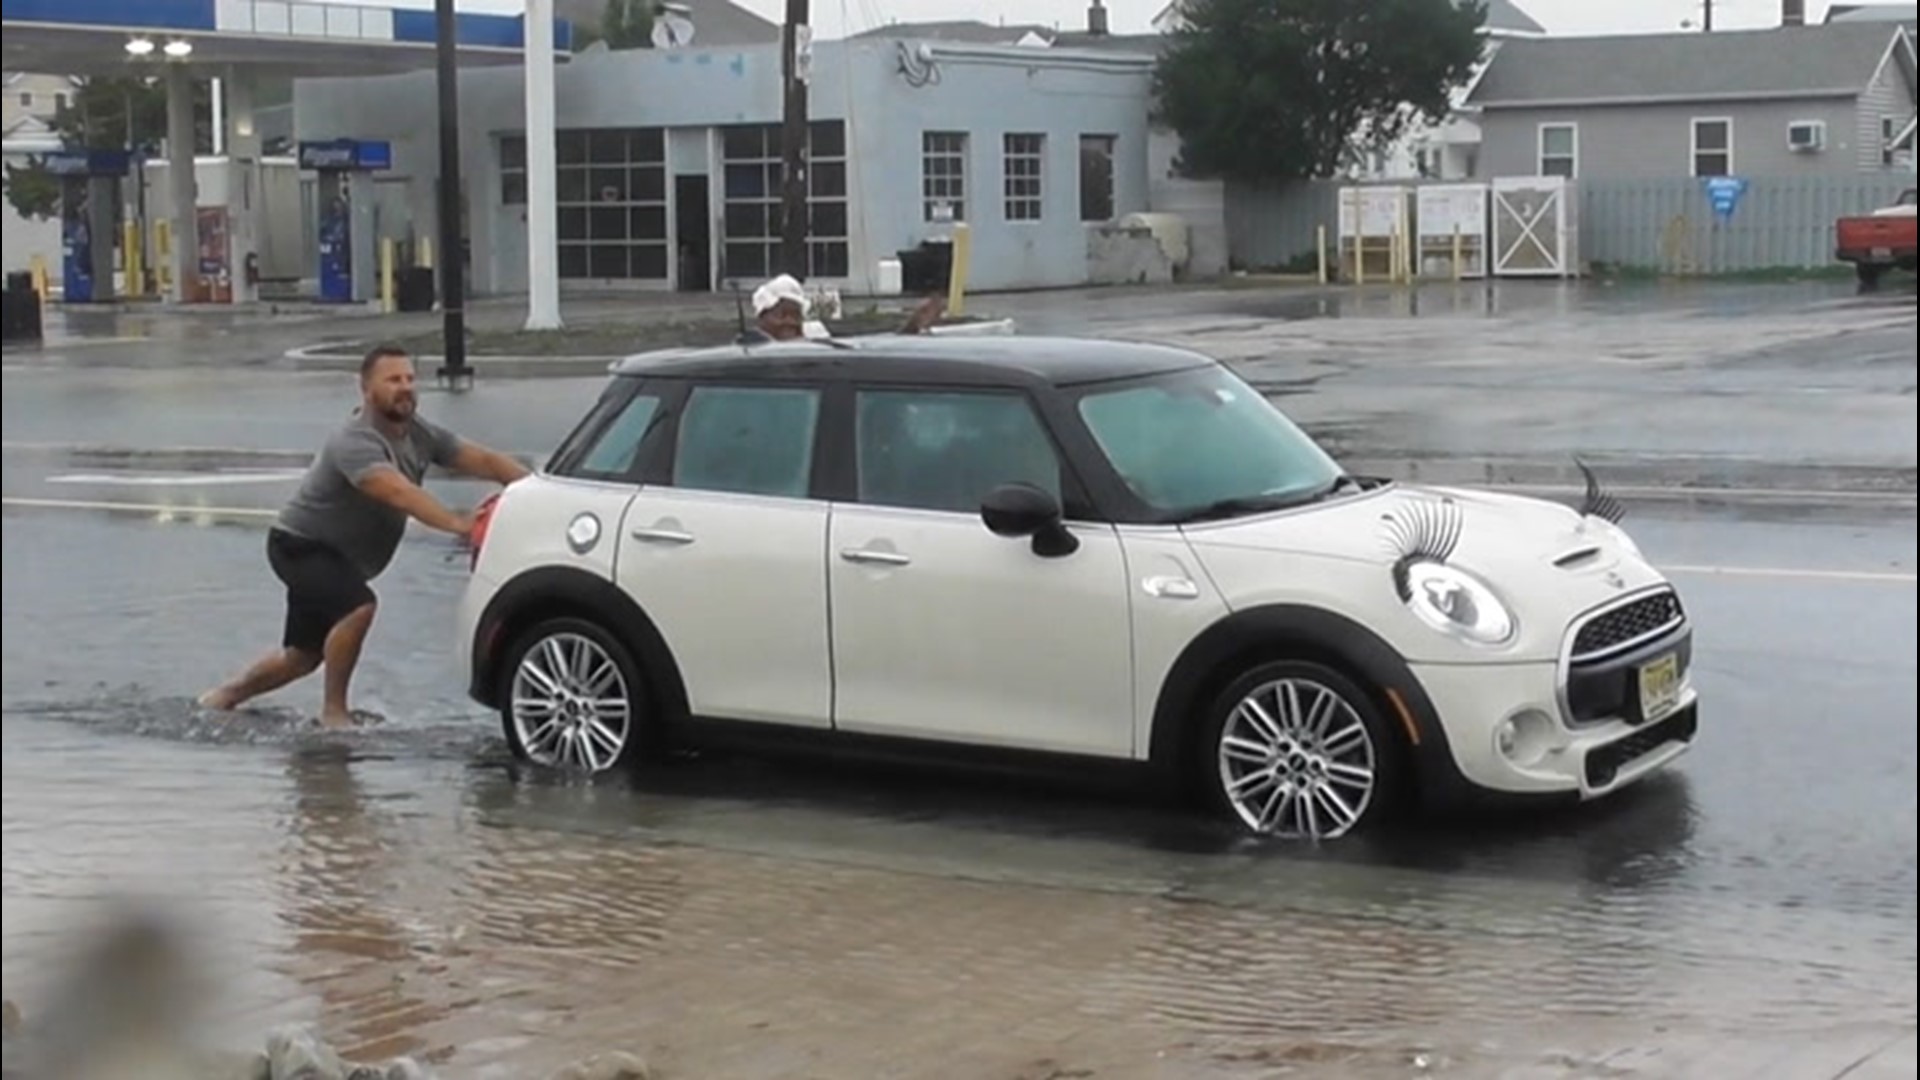 Heavy rainfall from Tropical Storm Fay causes coastal flooding in Wildwood, New Jersey, on July 10, forcing some roads to close. Some cars were seen stranded.